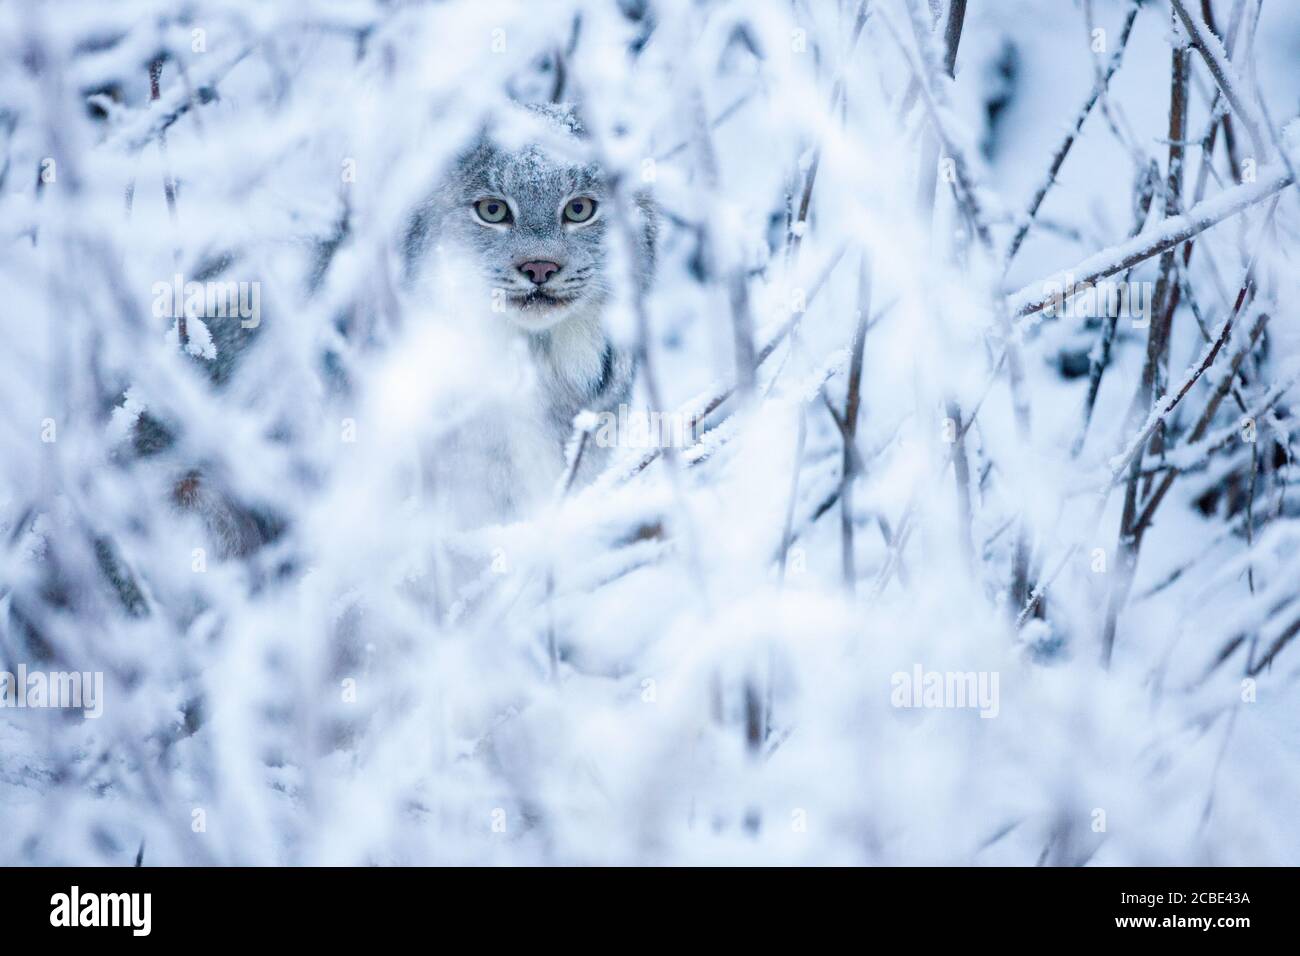 A wild Canada lynx peering through a small gap in the frosty brush in Northwest BC, Canada. Stock Photo